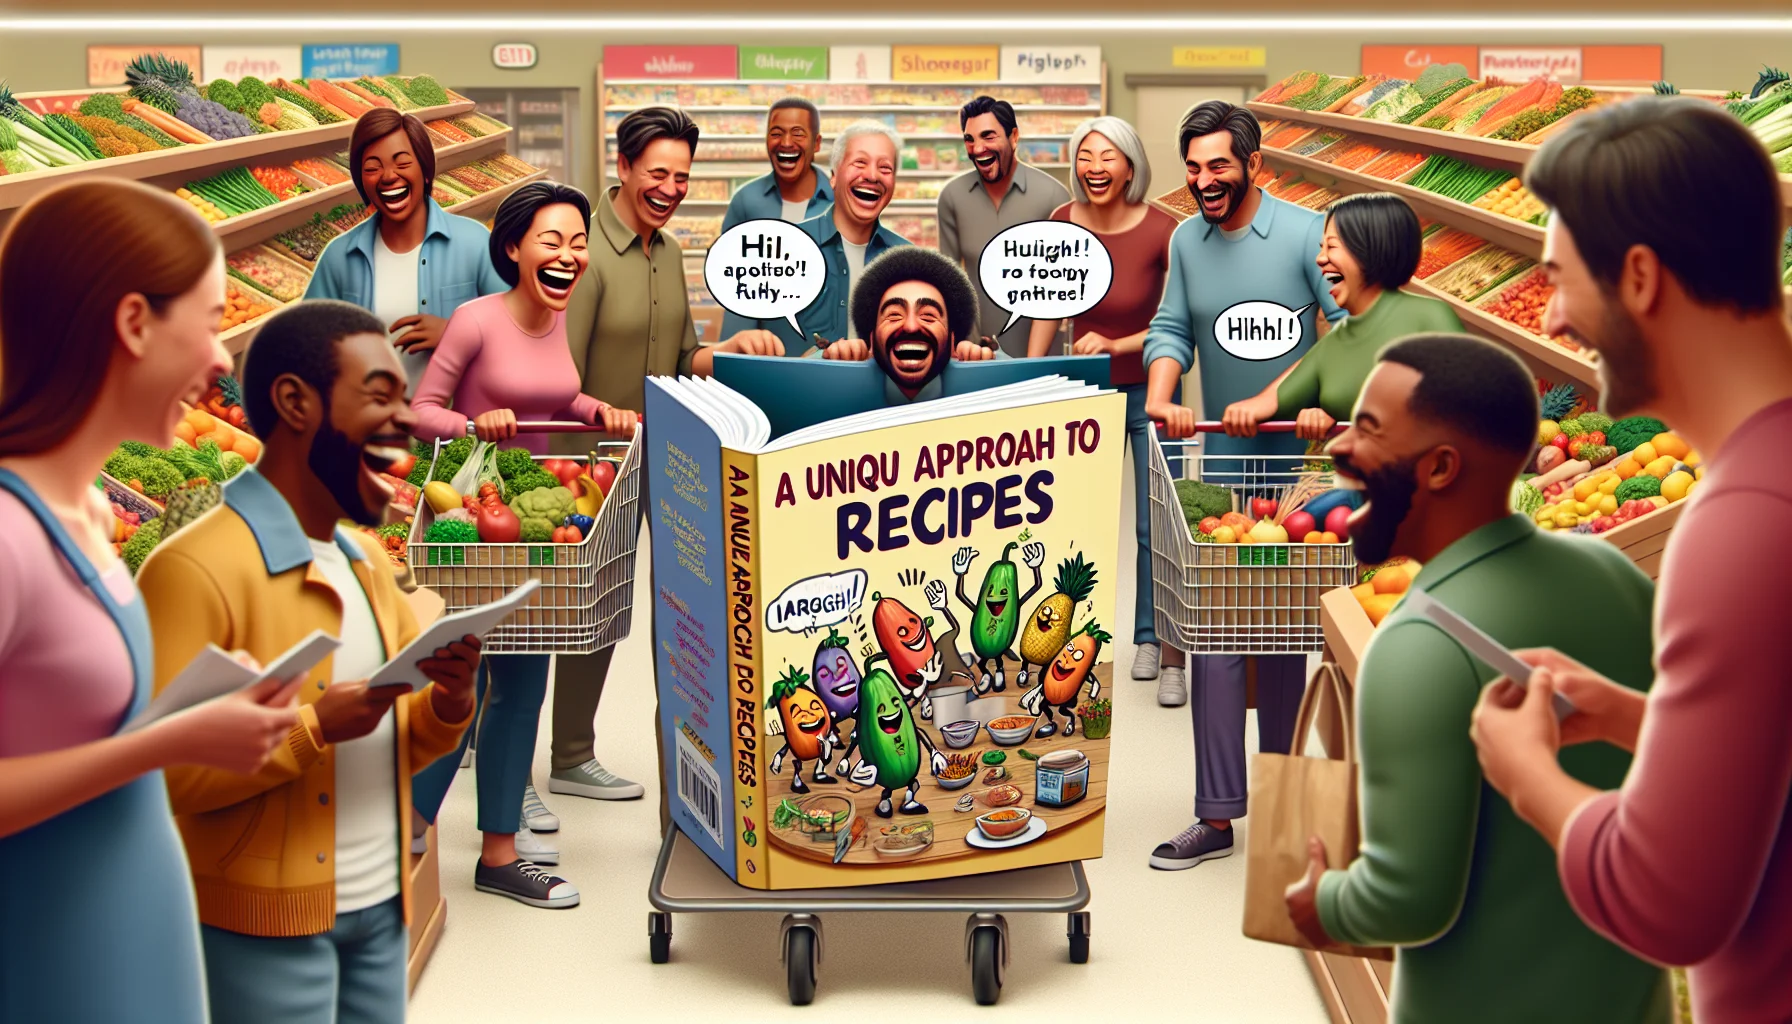 Visualize a humorous scene in a budget-friendly grocery store. People of multiple descents such as Hispanic, Caucasian, and Black are perusing through the store. The central focus shows a creatively designed recipes book titled 'A Unique Approach to Recipes'. It is playfully decorated with cartoon vegetables cracking jokes and engaging in playful activities. It emphasizes healthy and affordable ingredients while attracting attention from shoppers, radiating an atmosphere of fun and lively interaction. Shoppers, both men and women, laugh as they read humor-filled tips, and their shopping carts are filled with colorful fruits and vegetables.